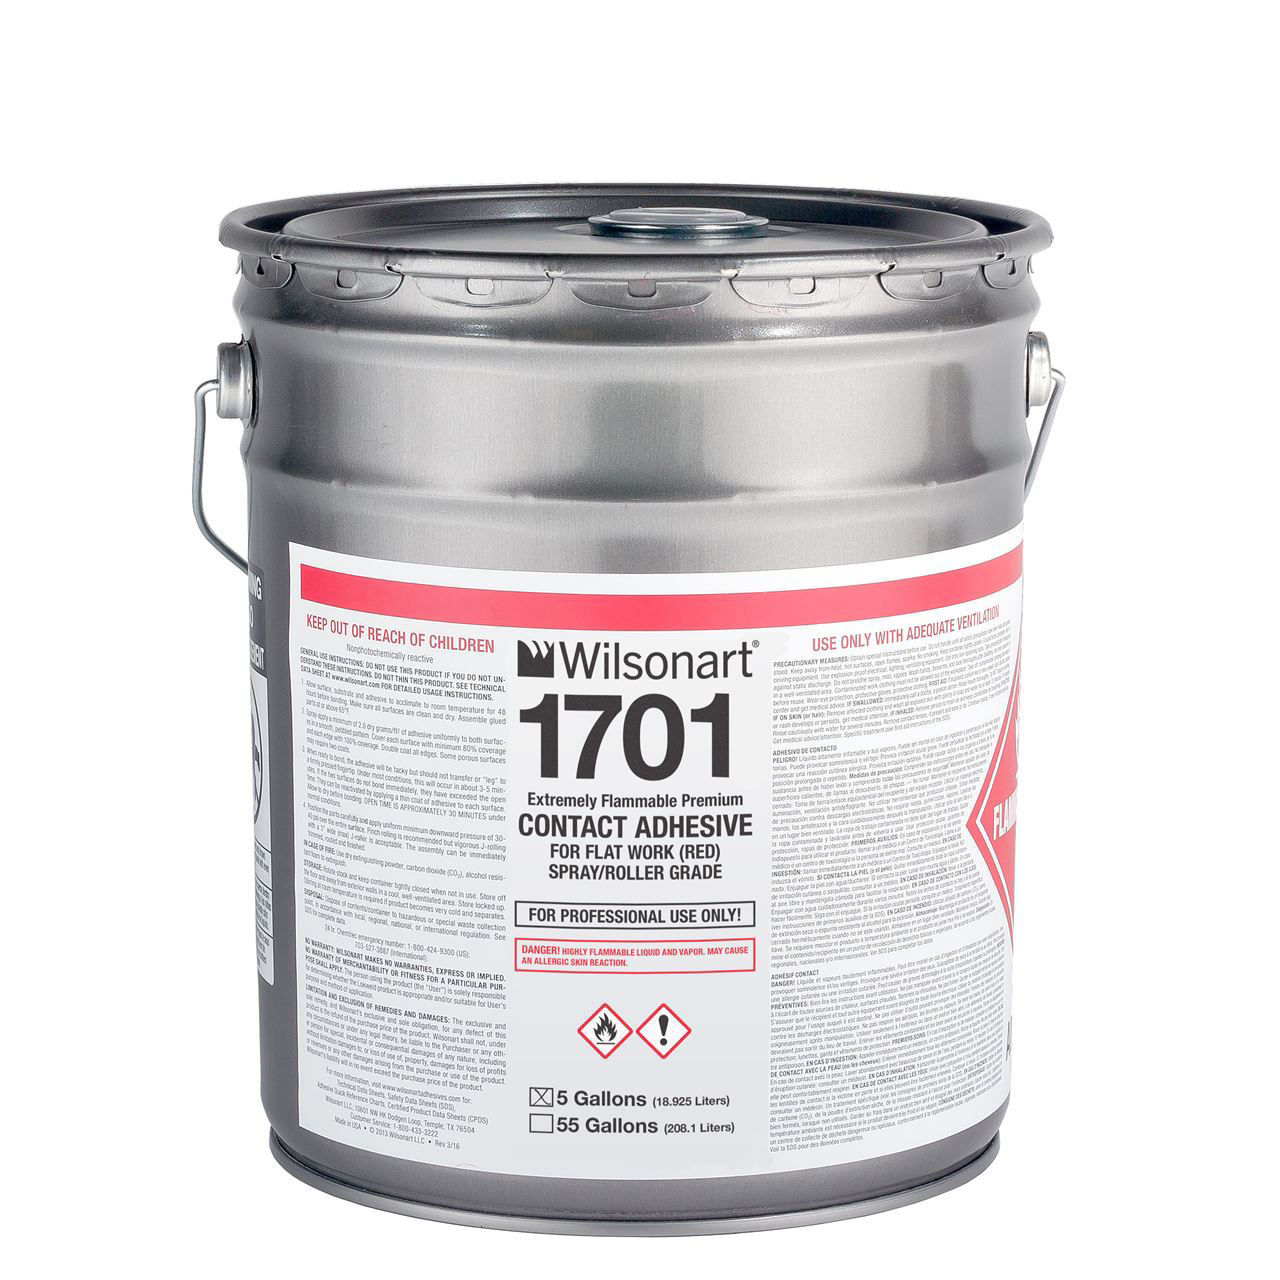 Wilsonart 1701 Low VOC Contact Adhesive PL | Surfaces, Supplies and